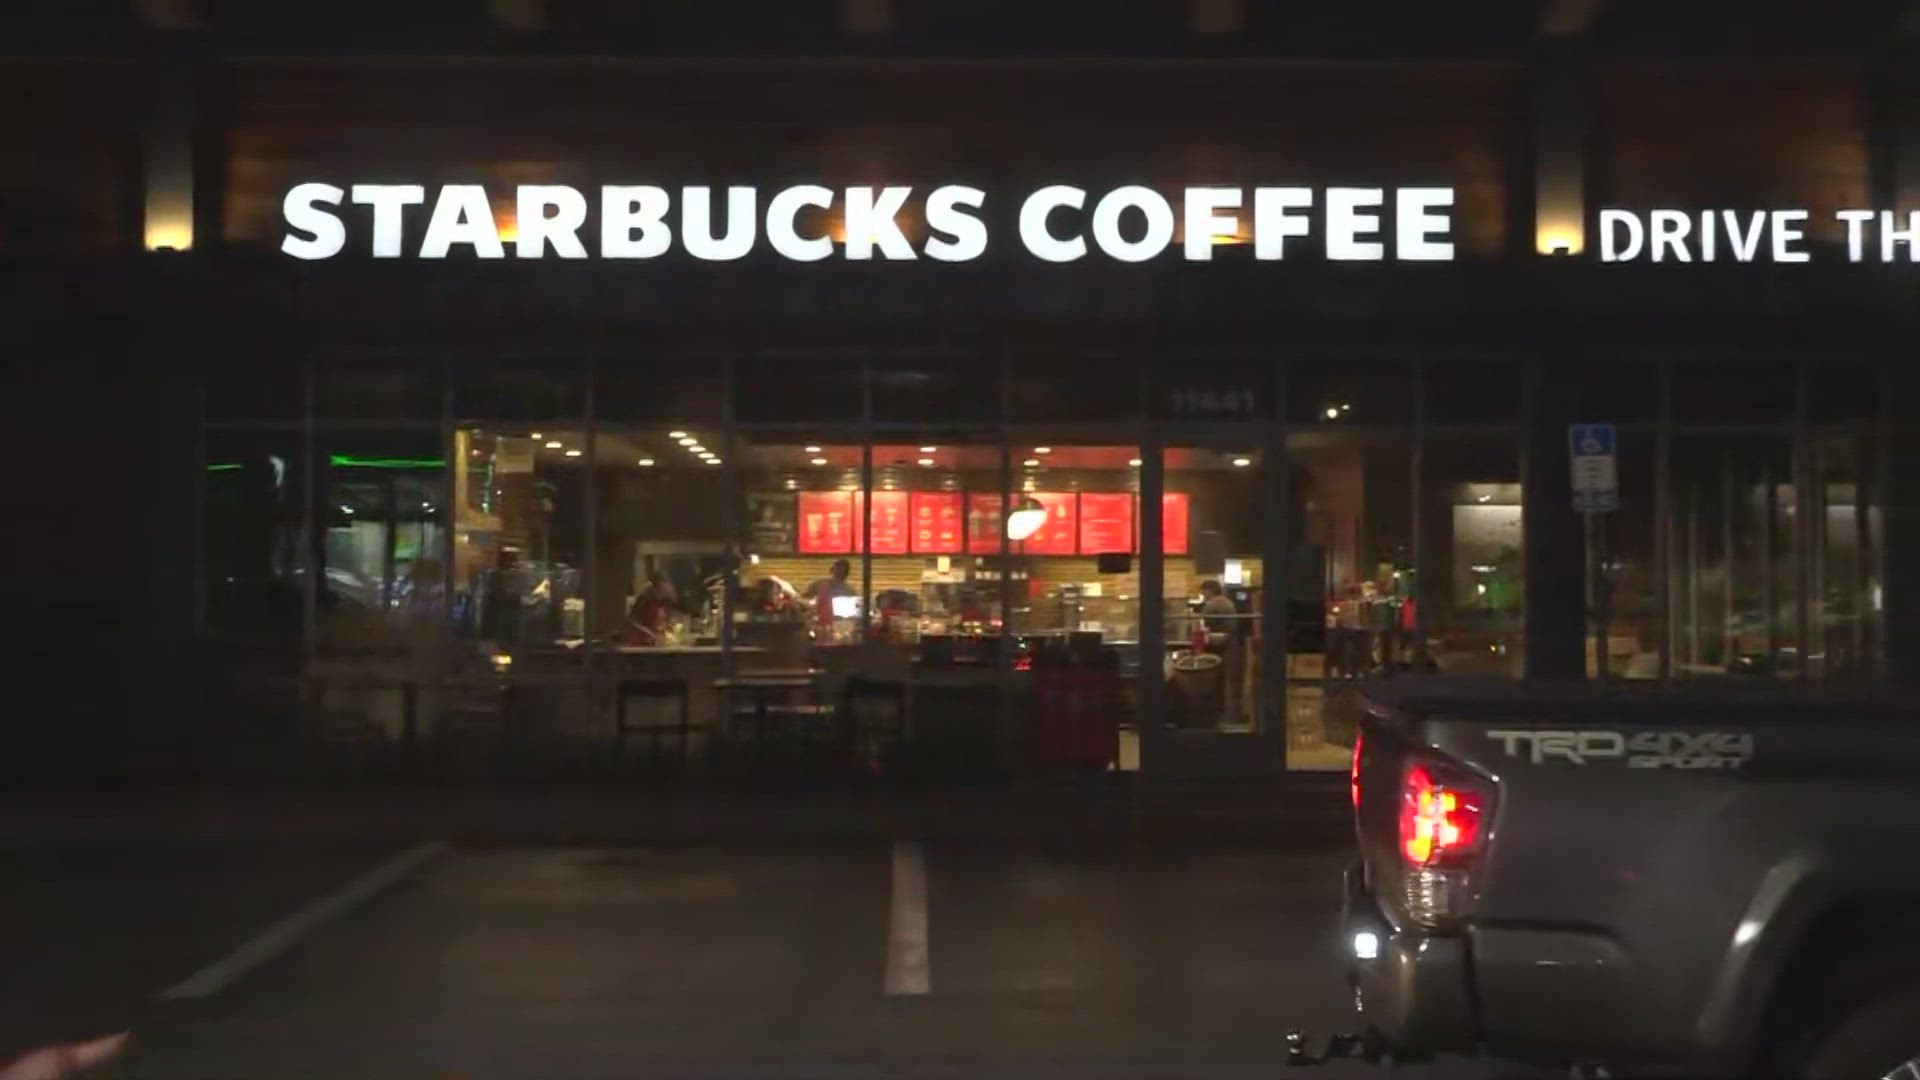 The Starbucks store in Mandarin is operating in a drive-thru only capacity Thursday as some of the store's workers are picketing or striking for several changes.